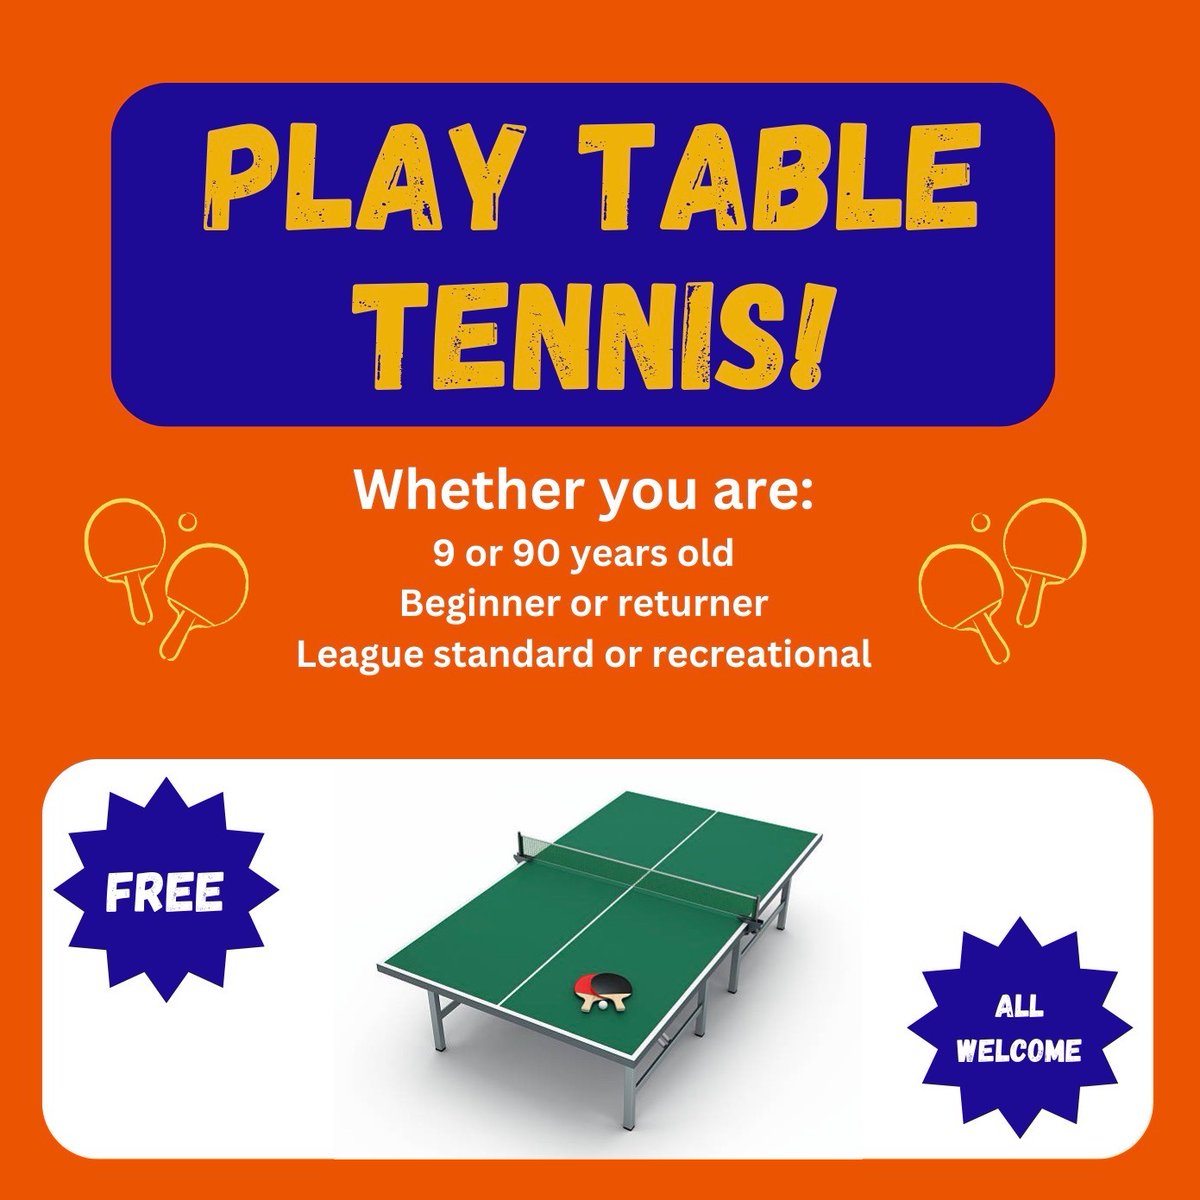 Dundee & District Table Tennis Association are holding 4 open sessions in our community space! Free All welcome Refreshments provided 11am - 1pm Sat 8th June Sat 15th June Sat 22nd June Sat29th June Questions? Phone: Erin 07733 306 768 Email: chairman@ddtta.co.uk